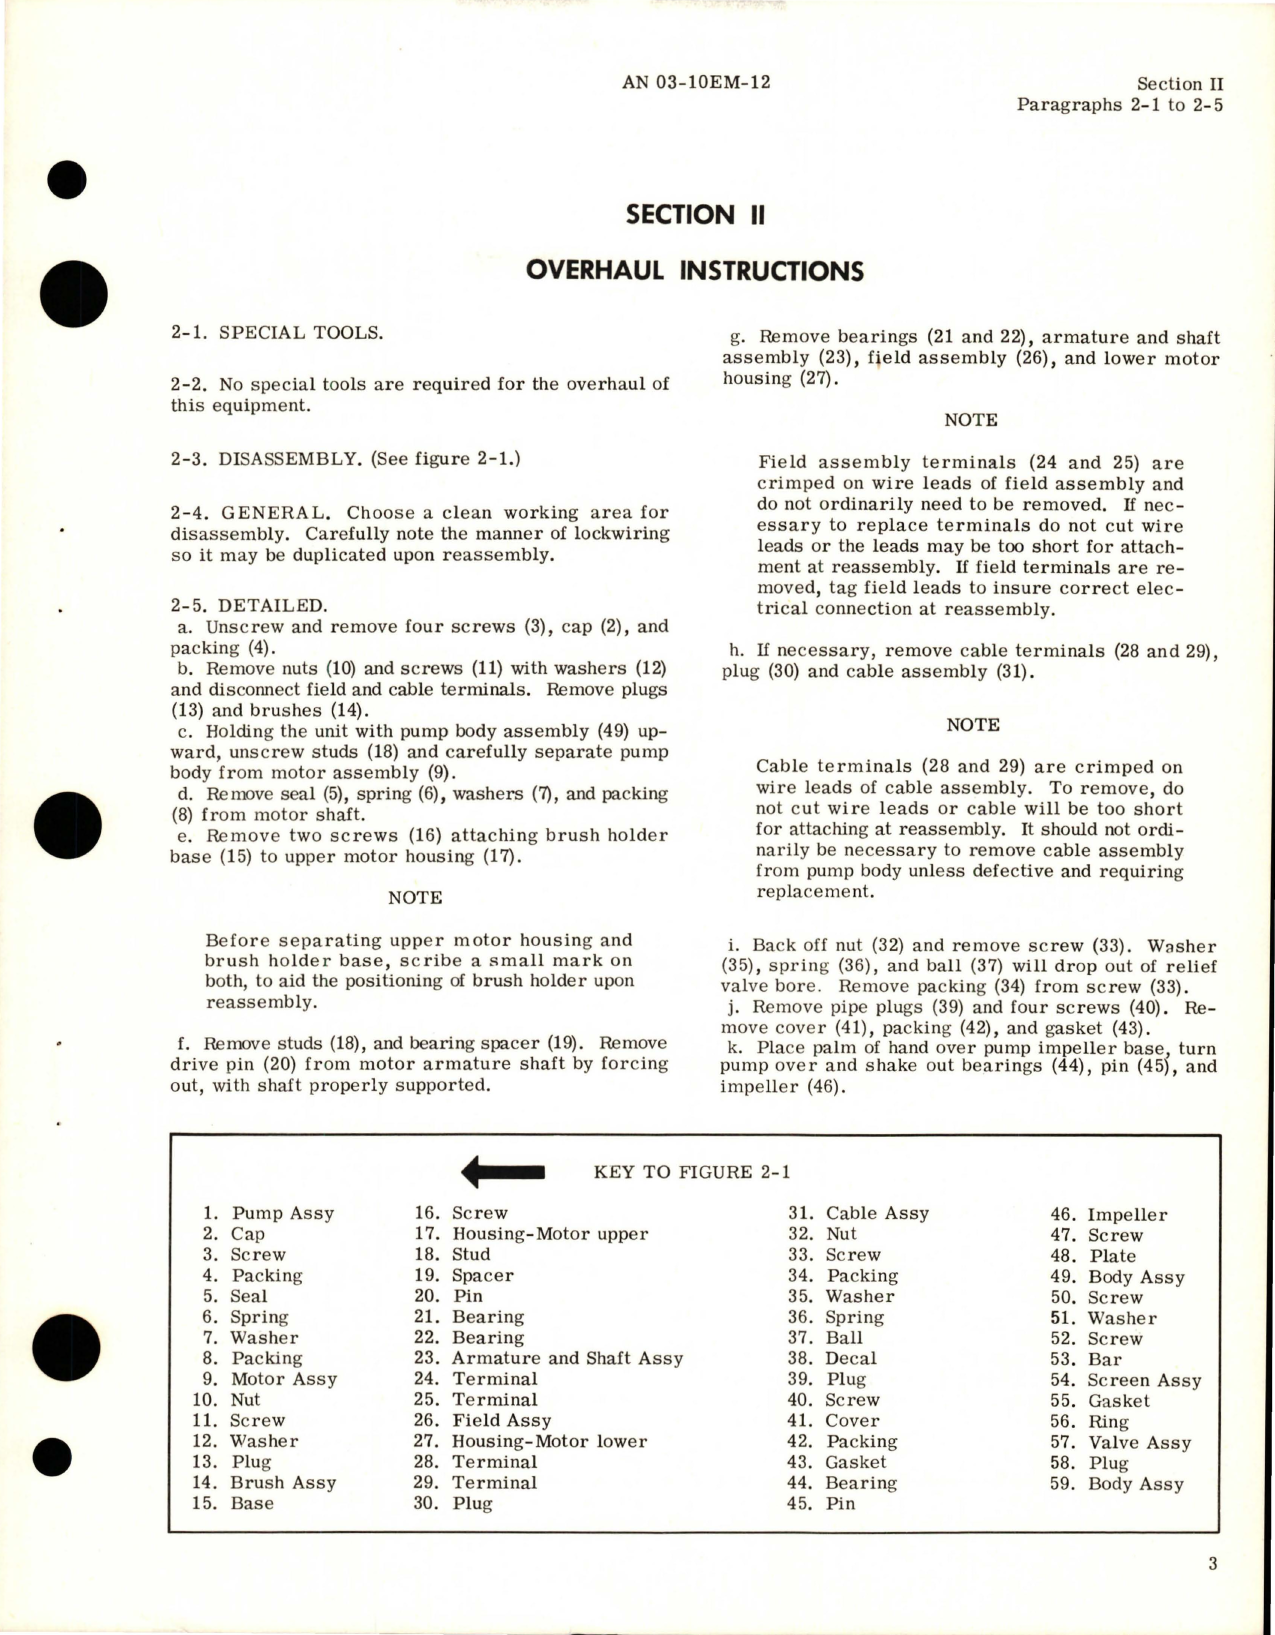 Sample page 7 from AirCorps Library document: Overhaul Instructions for Submerged Fuel Boost Pump